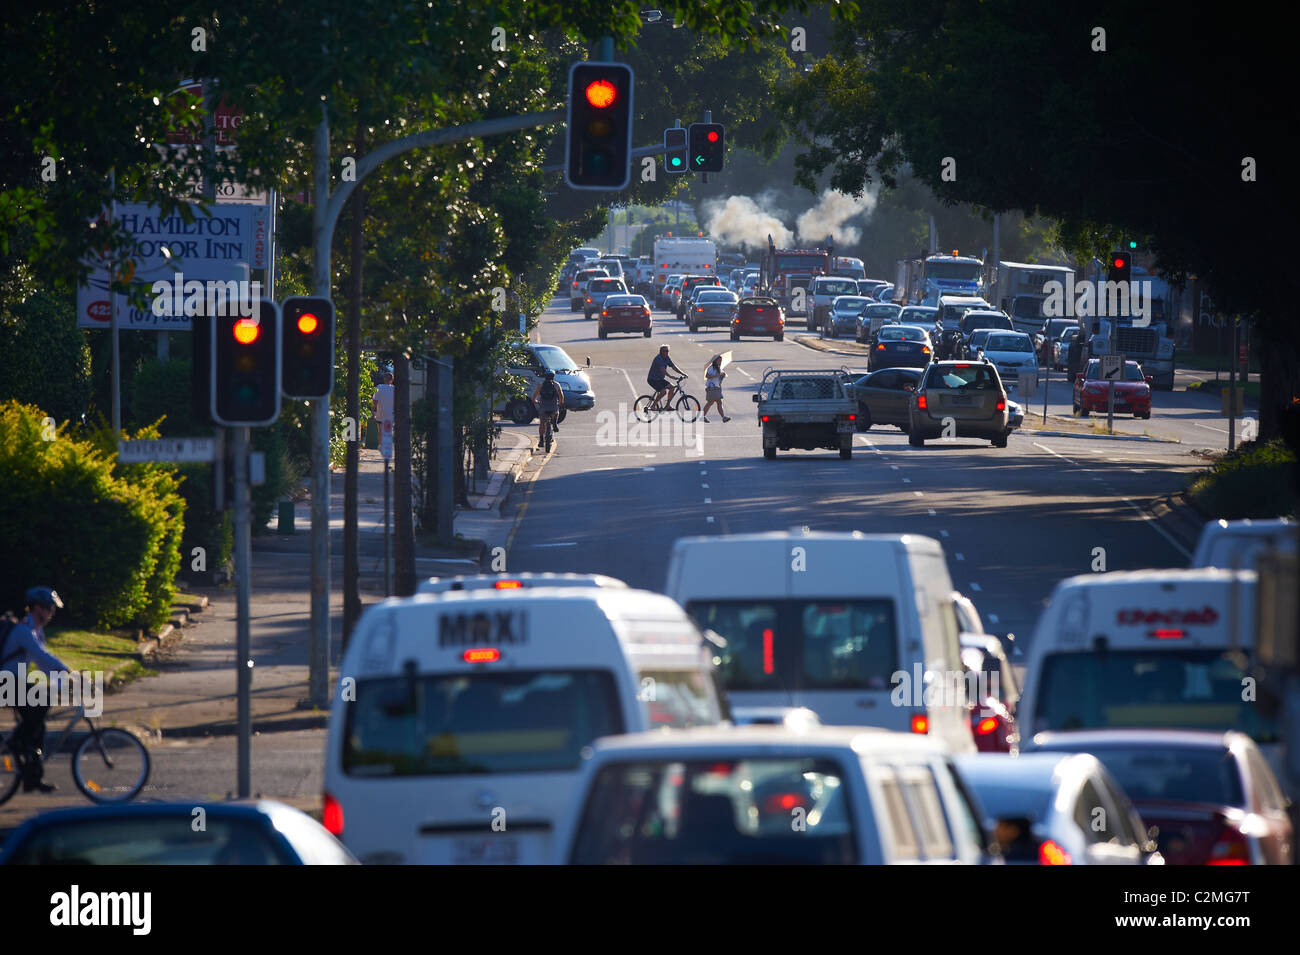 Traffic congestion & pollution Stock Photo